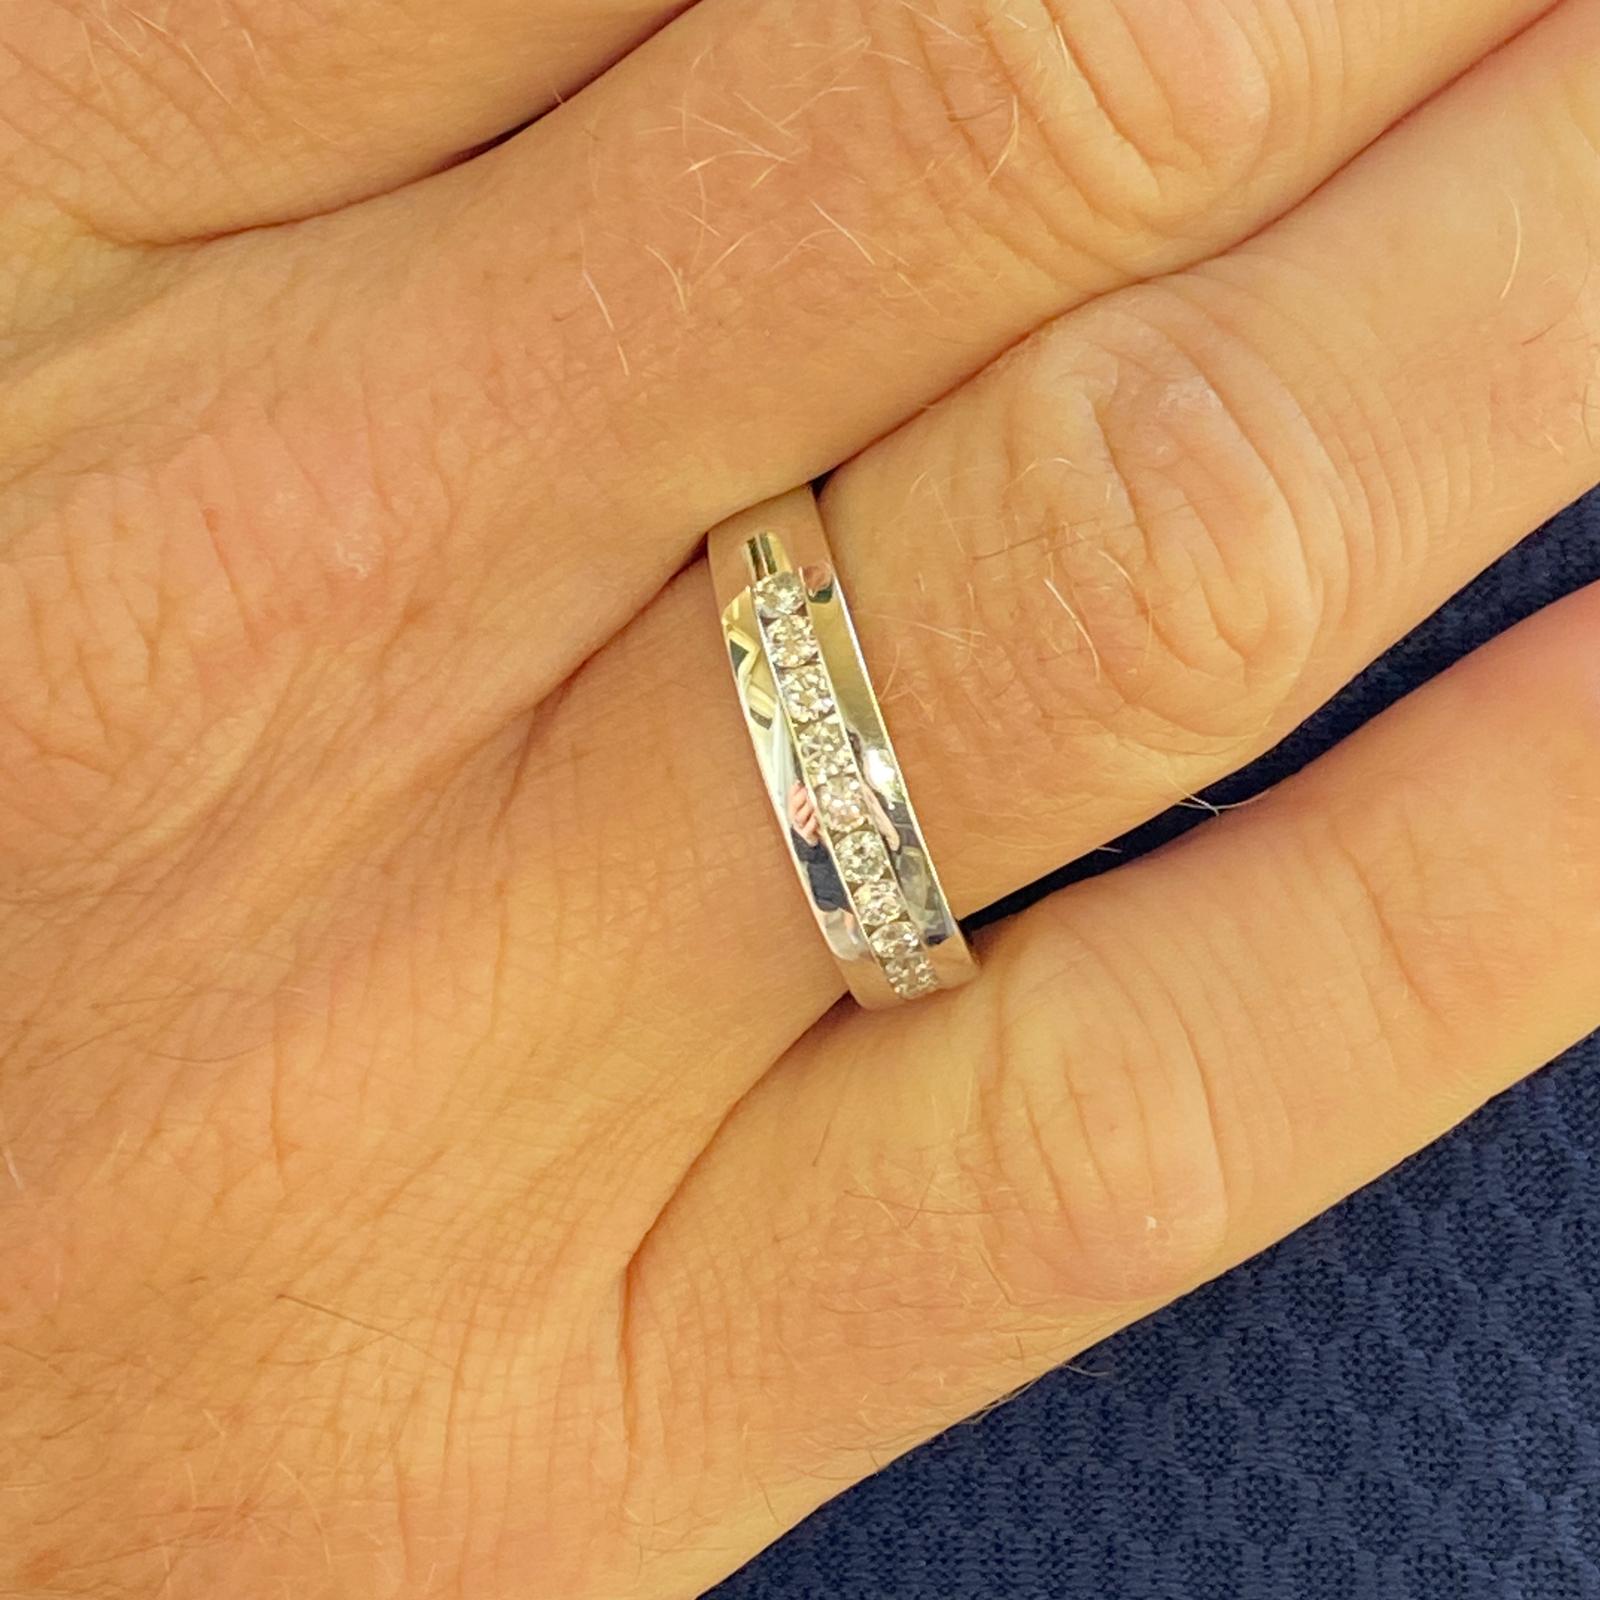 Gents diamond band ring fashioned in 14 karat white gold. The band features 11 channel set round brilliant cut diamonds weighing .55 carat total weight and graded G-H color and SI clarity. The band measures 5.5mm in width and is size 10. 